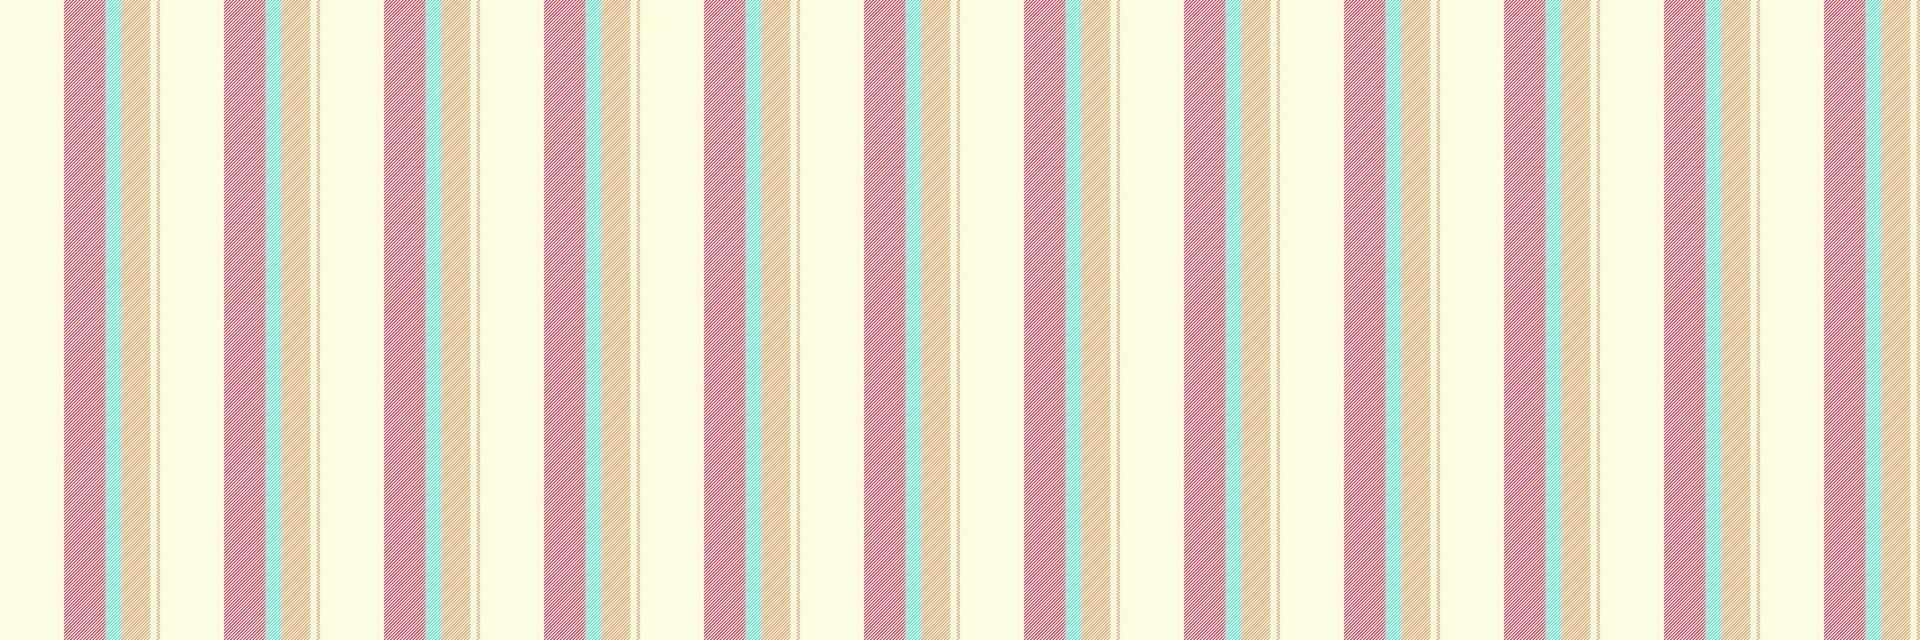 Bed vector texture lines, luxurious fabric pattern seamless. Paper stripe vertical textile background in light yellow and red colors.